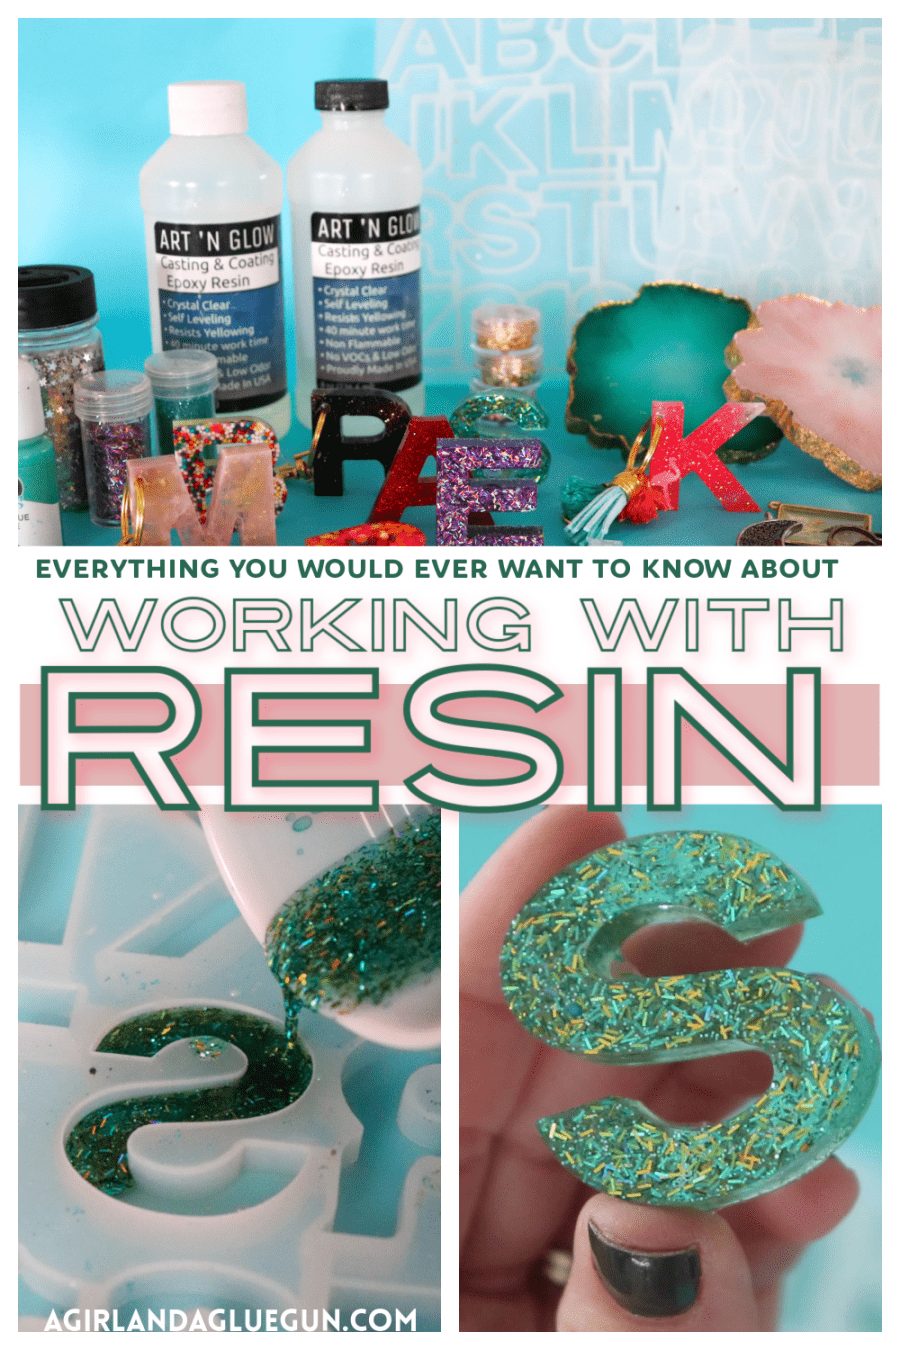 What Is Resin? - What Is Resin Made of and How Can You Use It?